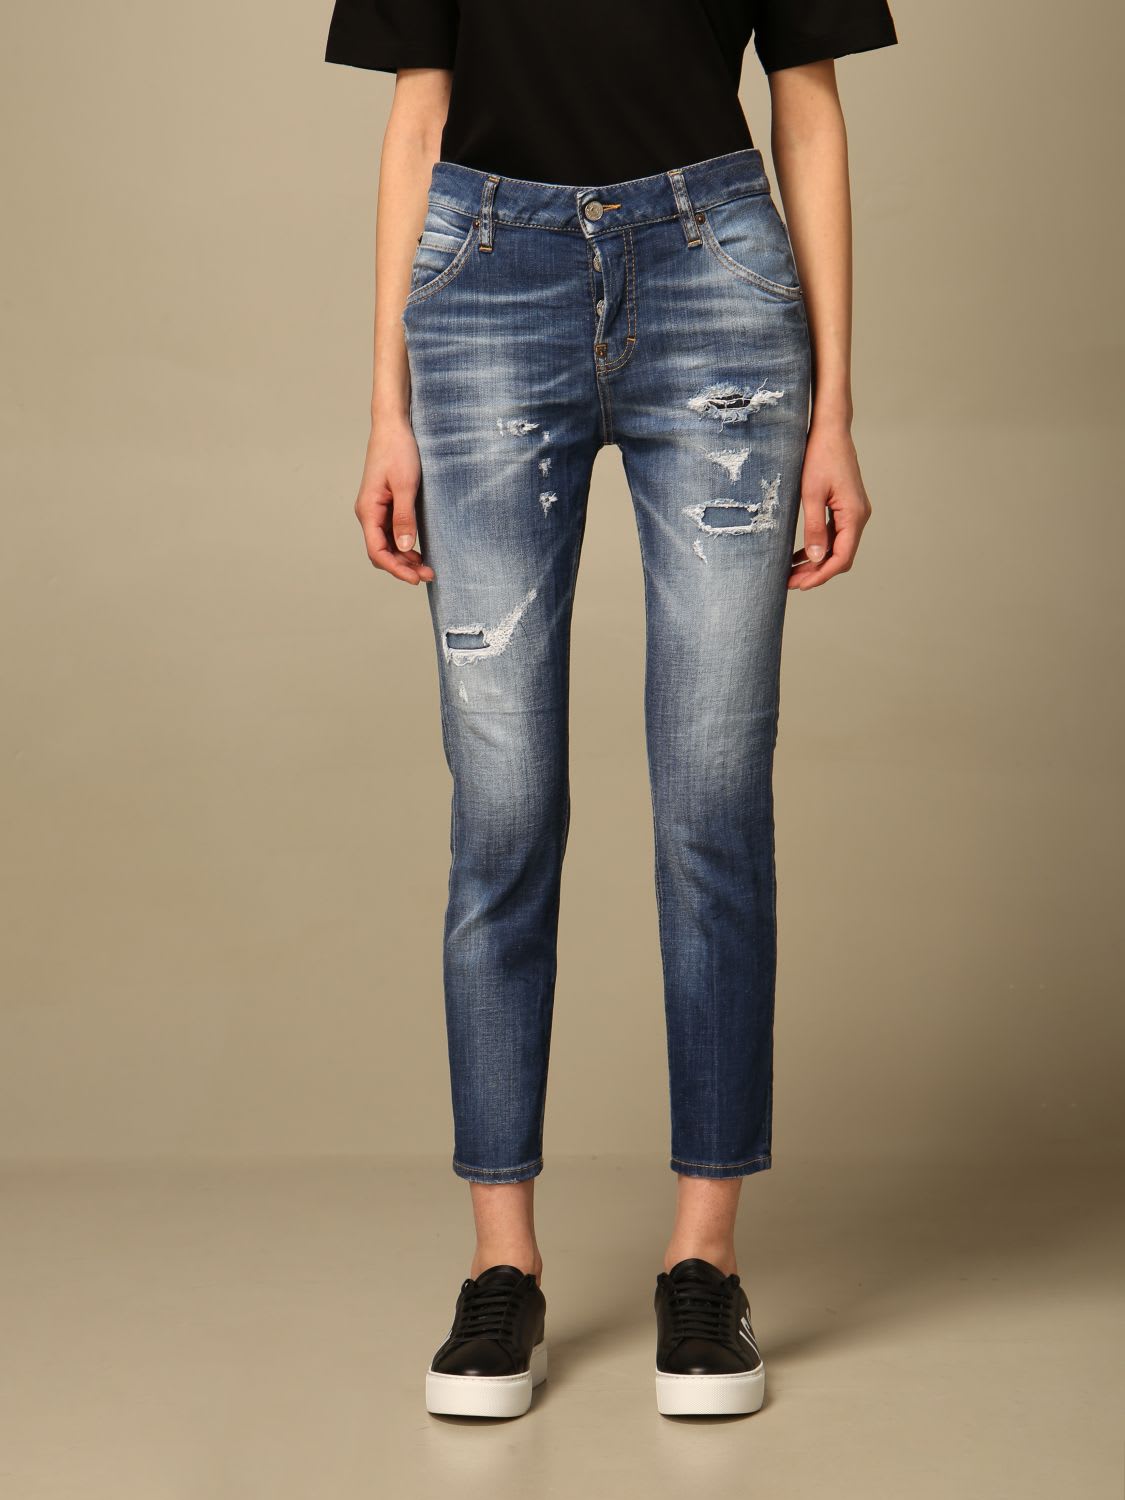 Dsquared2 Jeans Cool Girl Dsquared2 Jeans In Used Denim With Tearsp